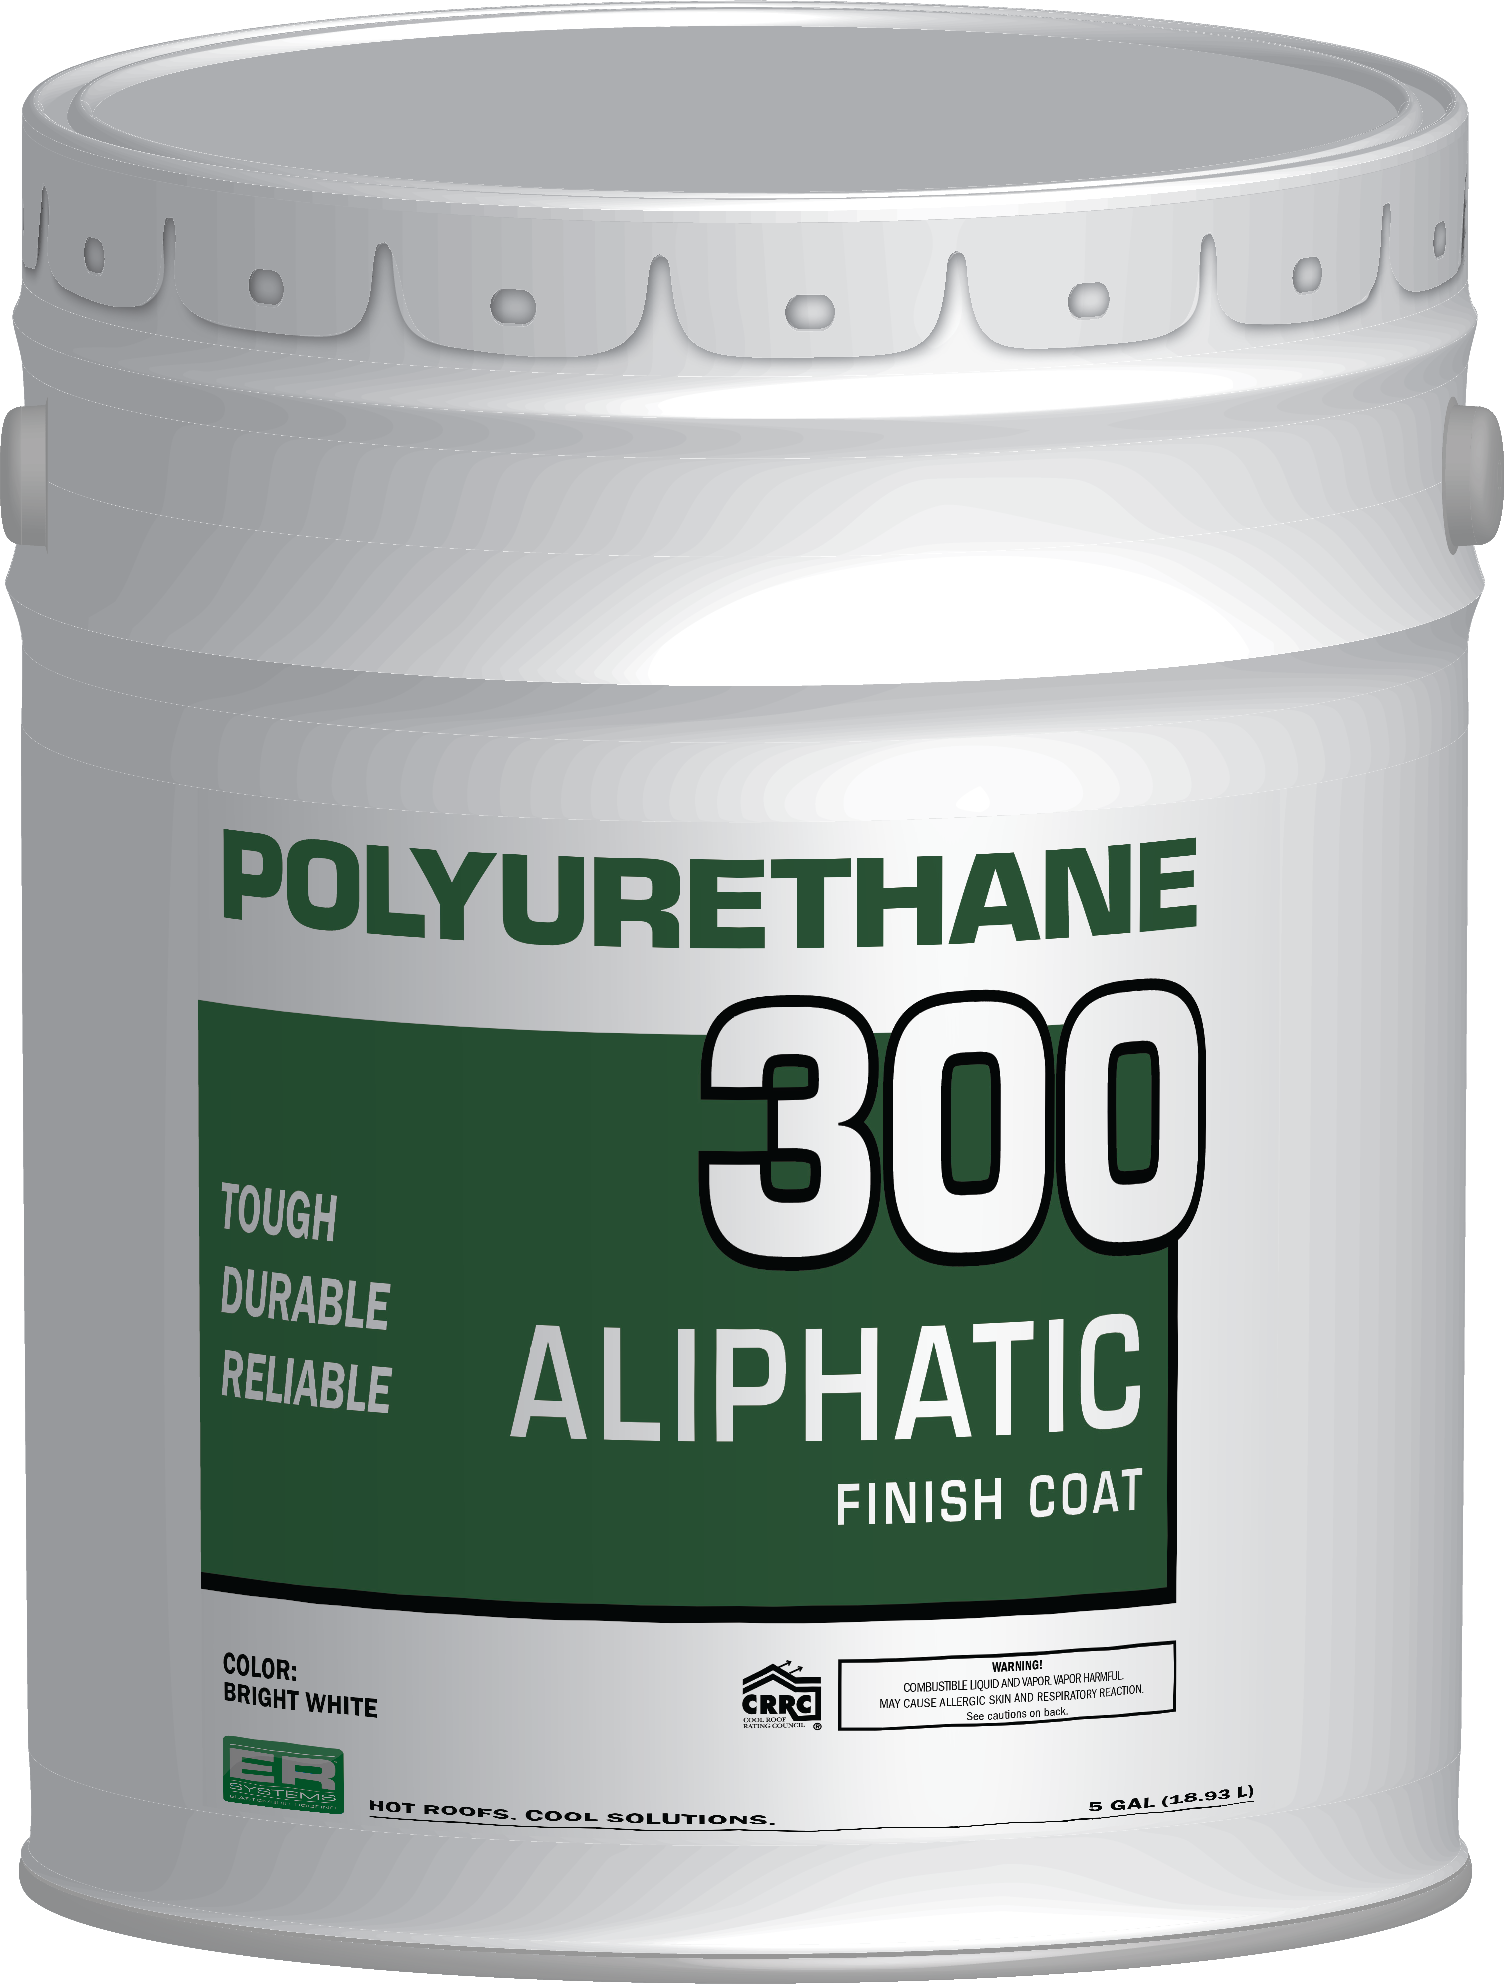 Read more about the article Polyurethane 300 Aliphatic Finish Coat